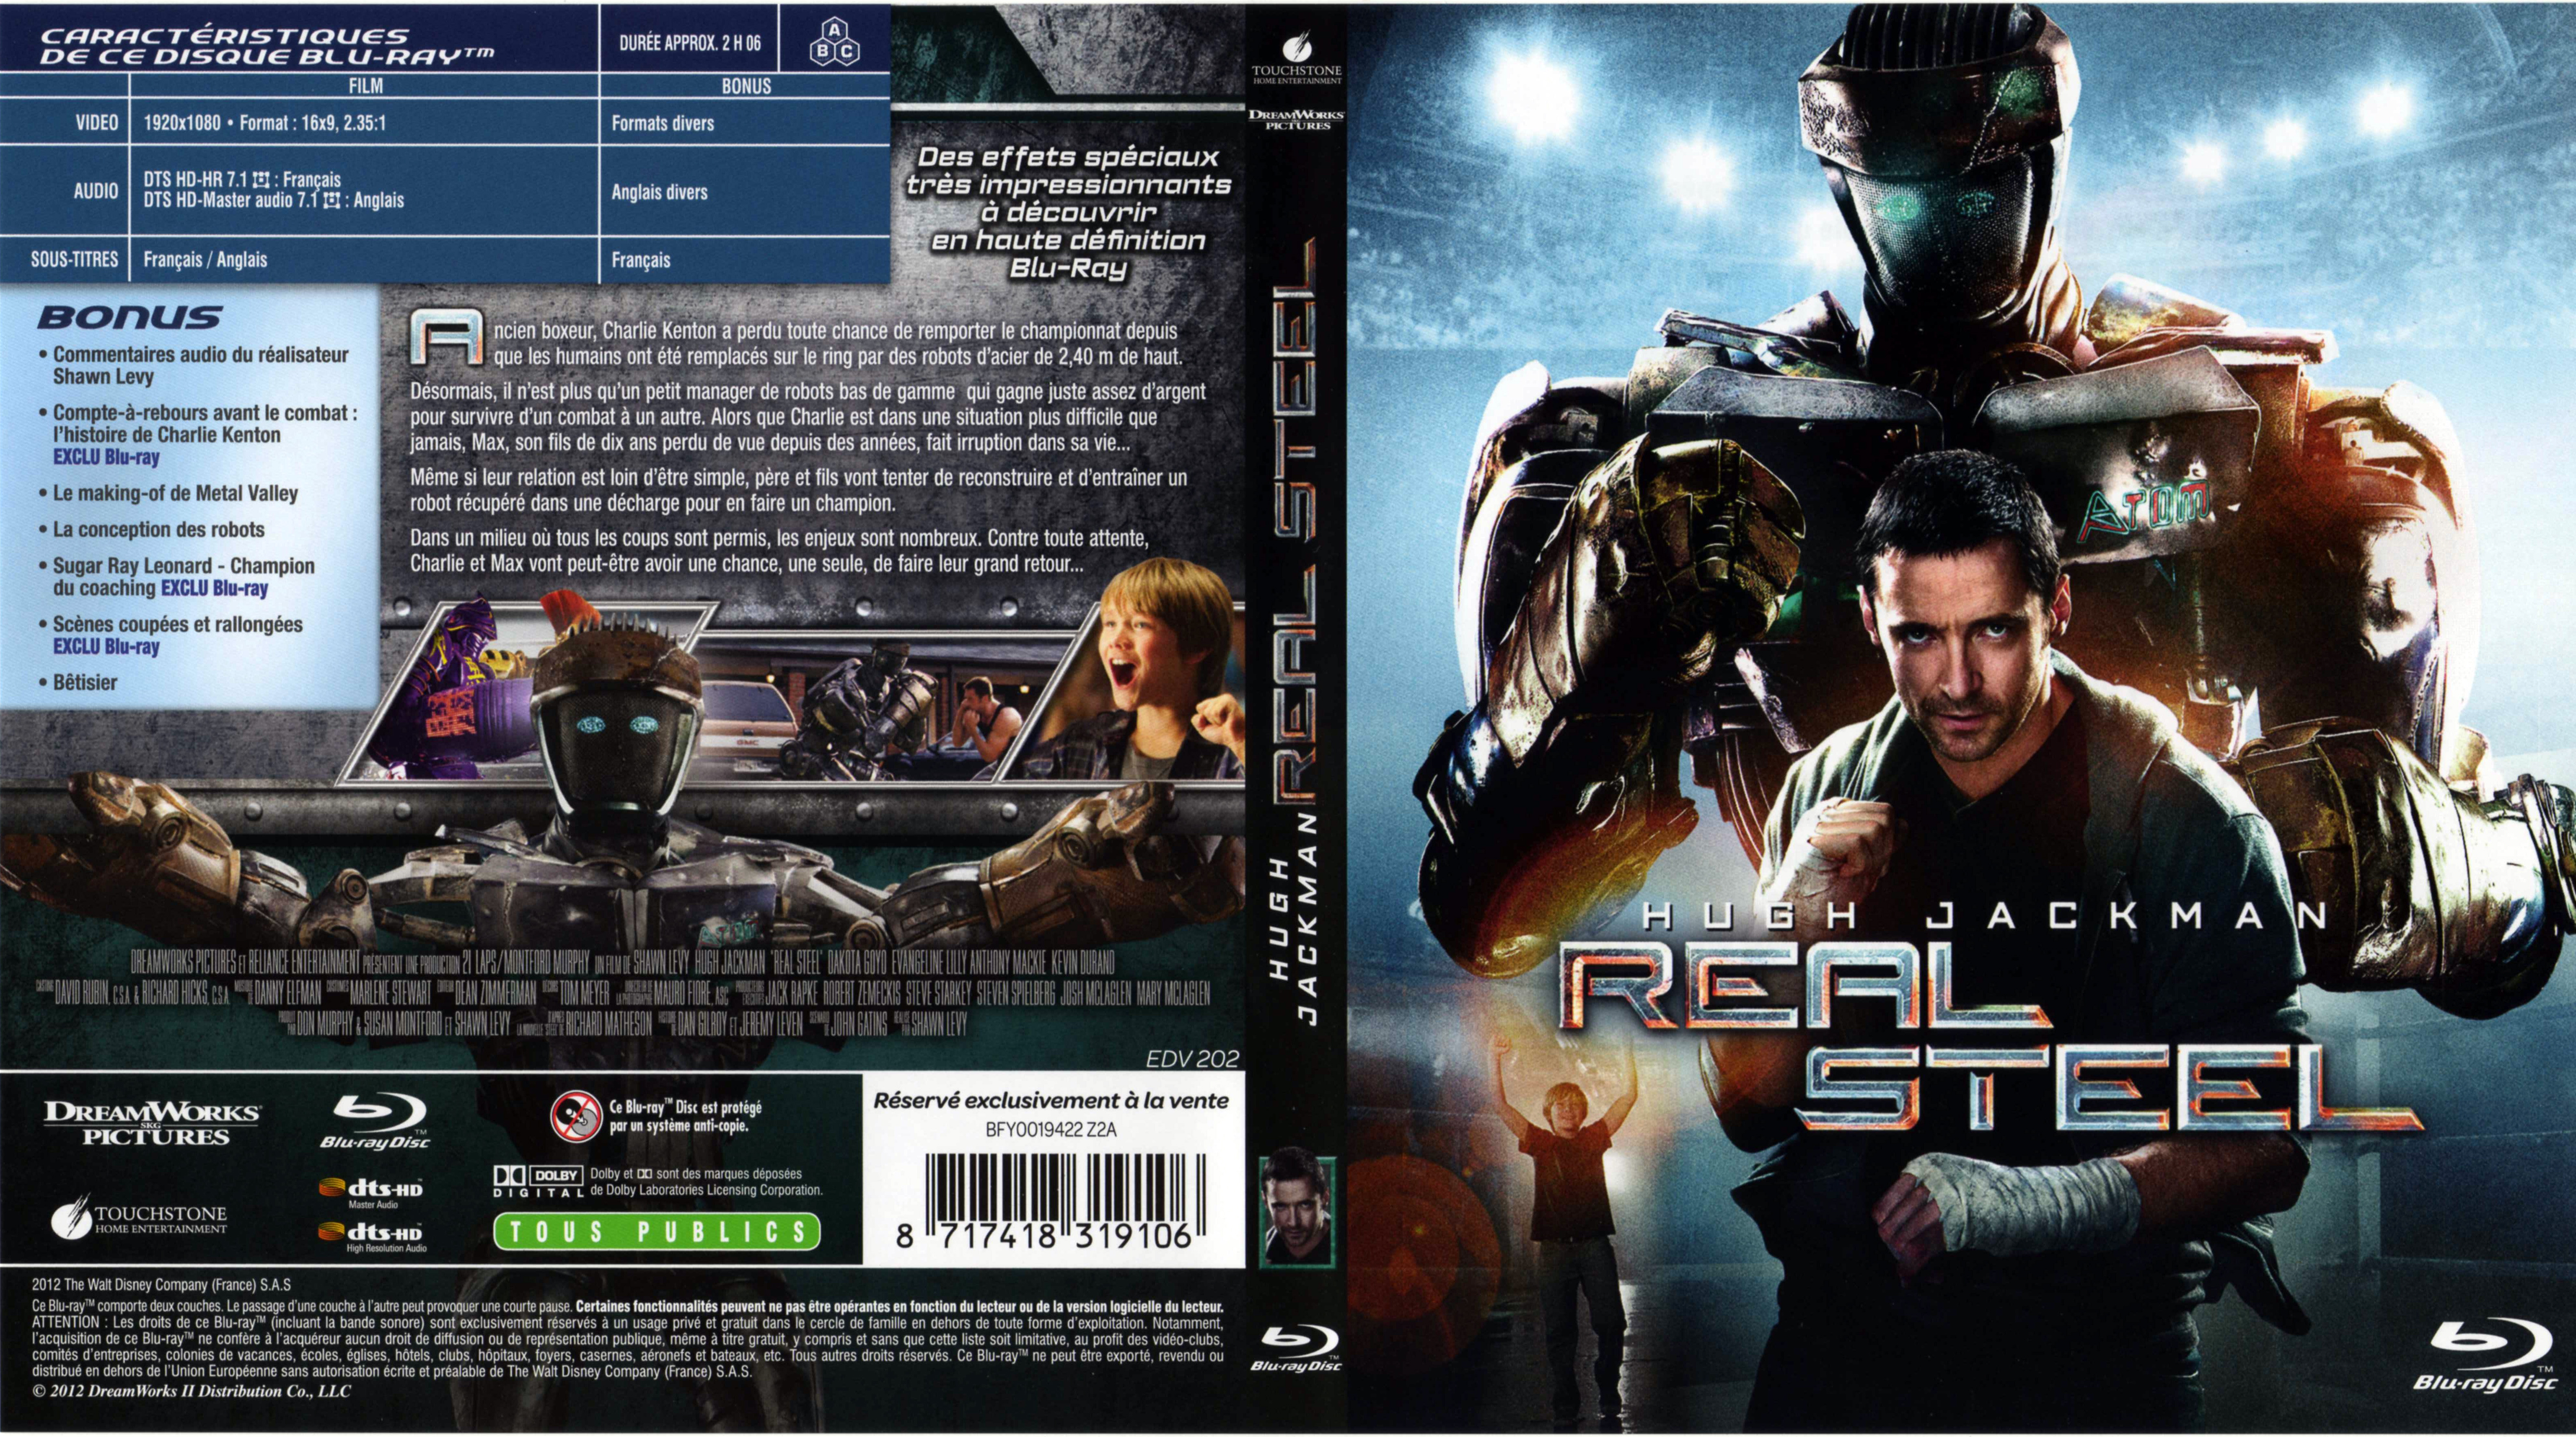 Jaquette DVD Real Steel (BLU-RAY)